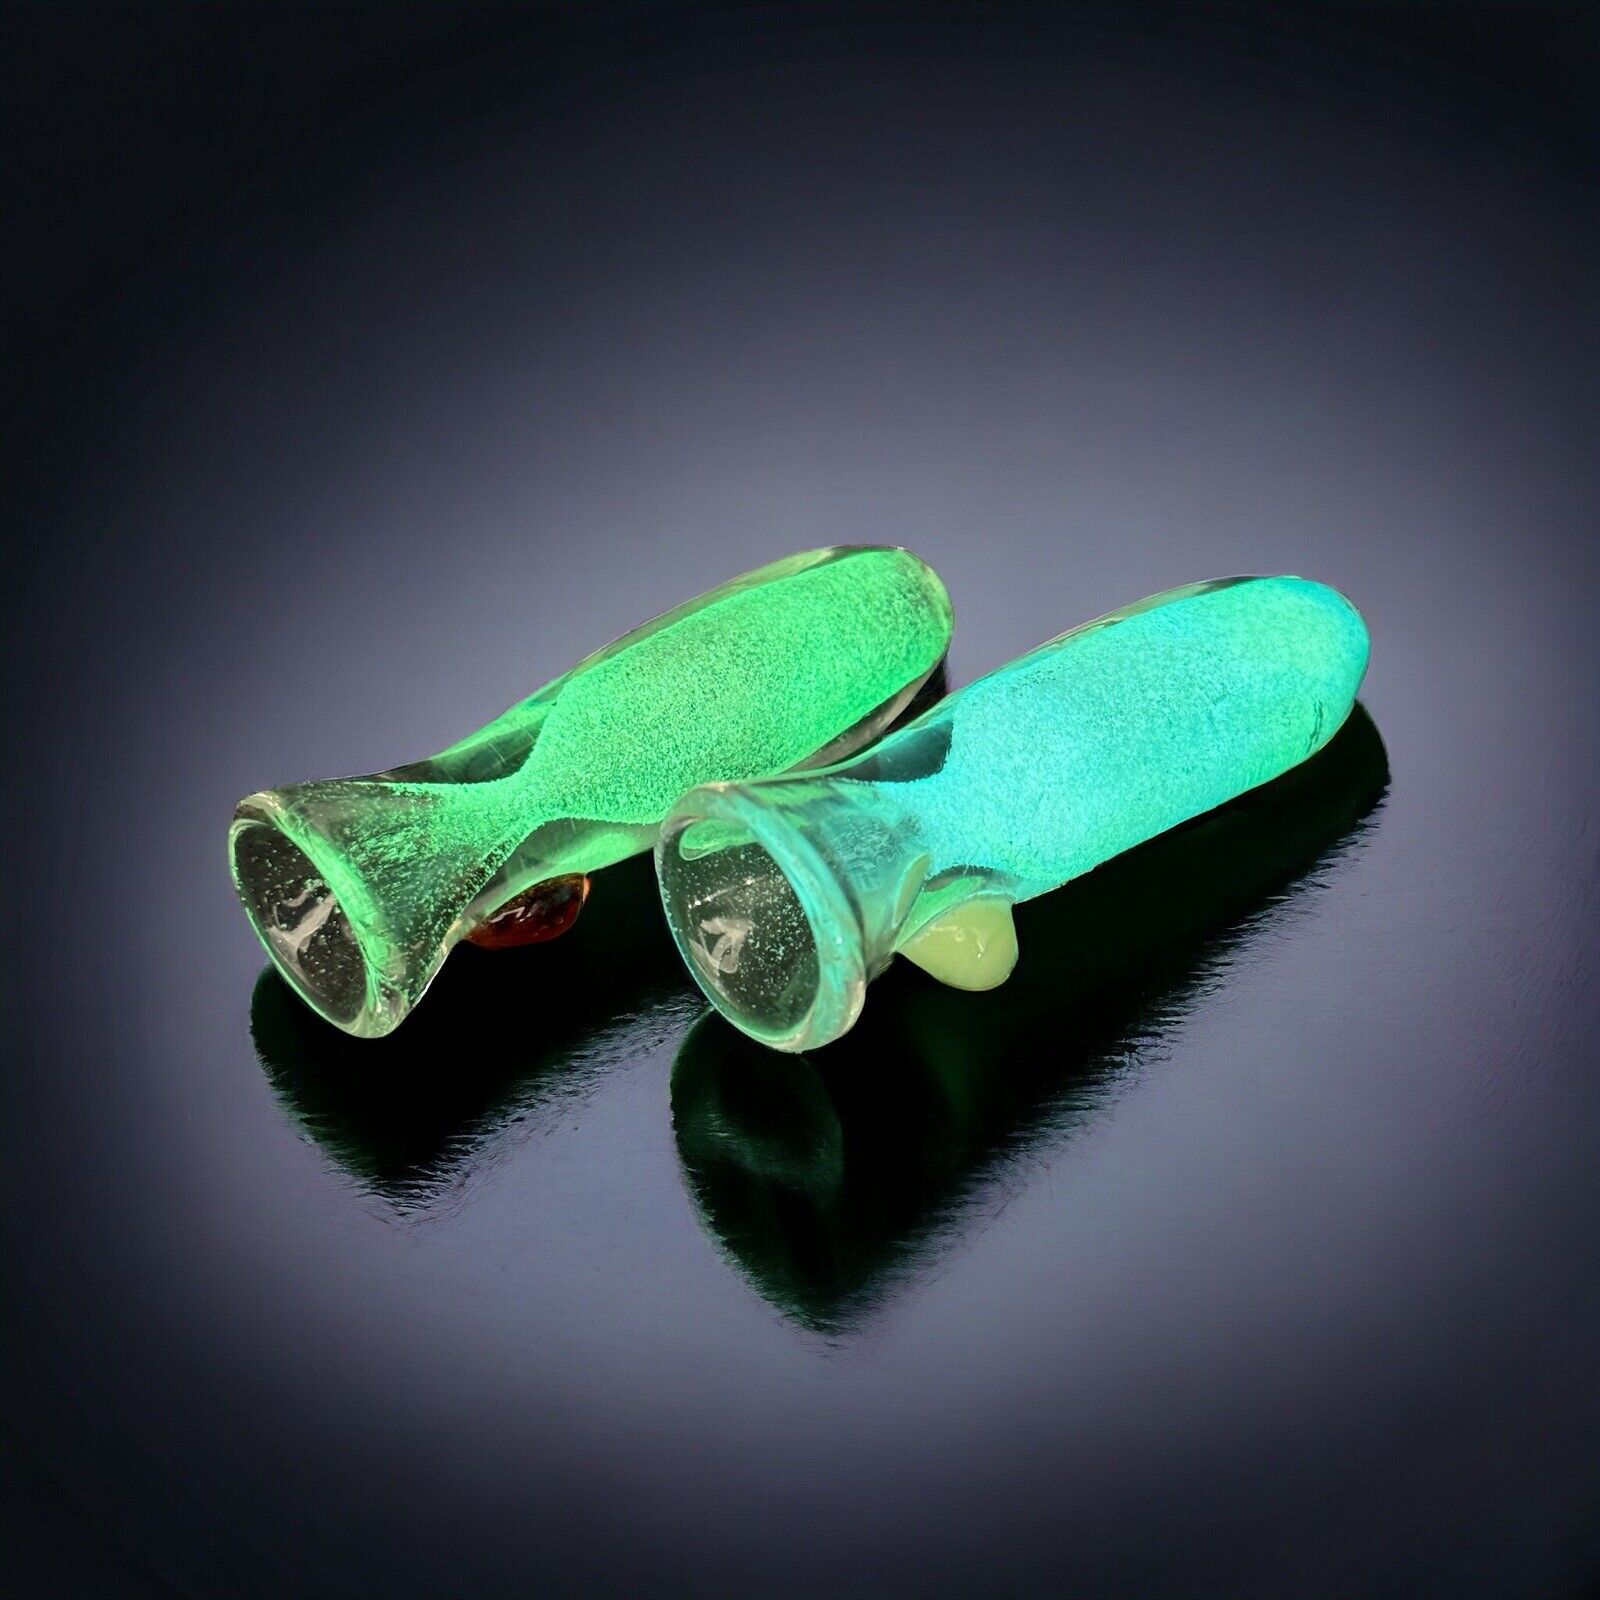 Glow In The Dark Chillum Glass Pipes, White Chillums But Glow In The Dark